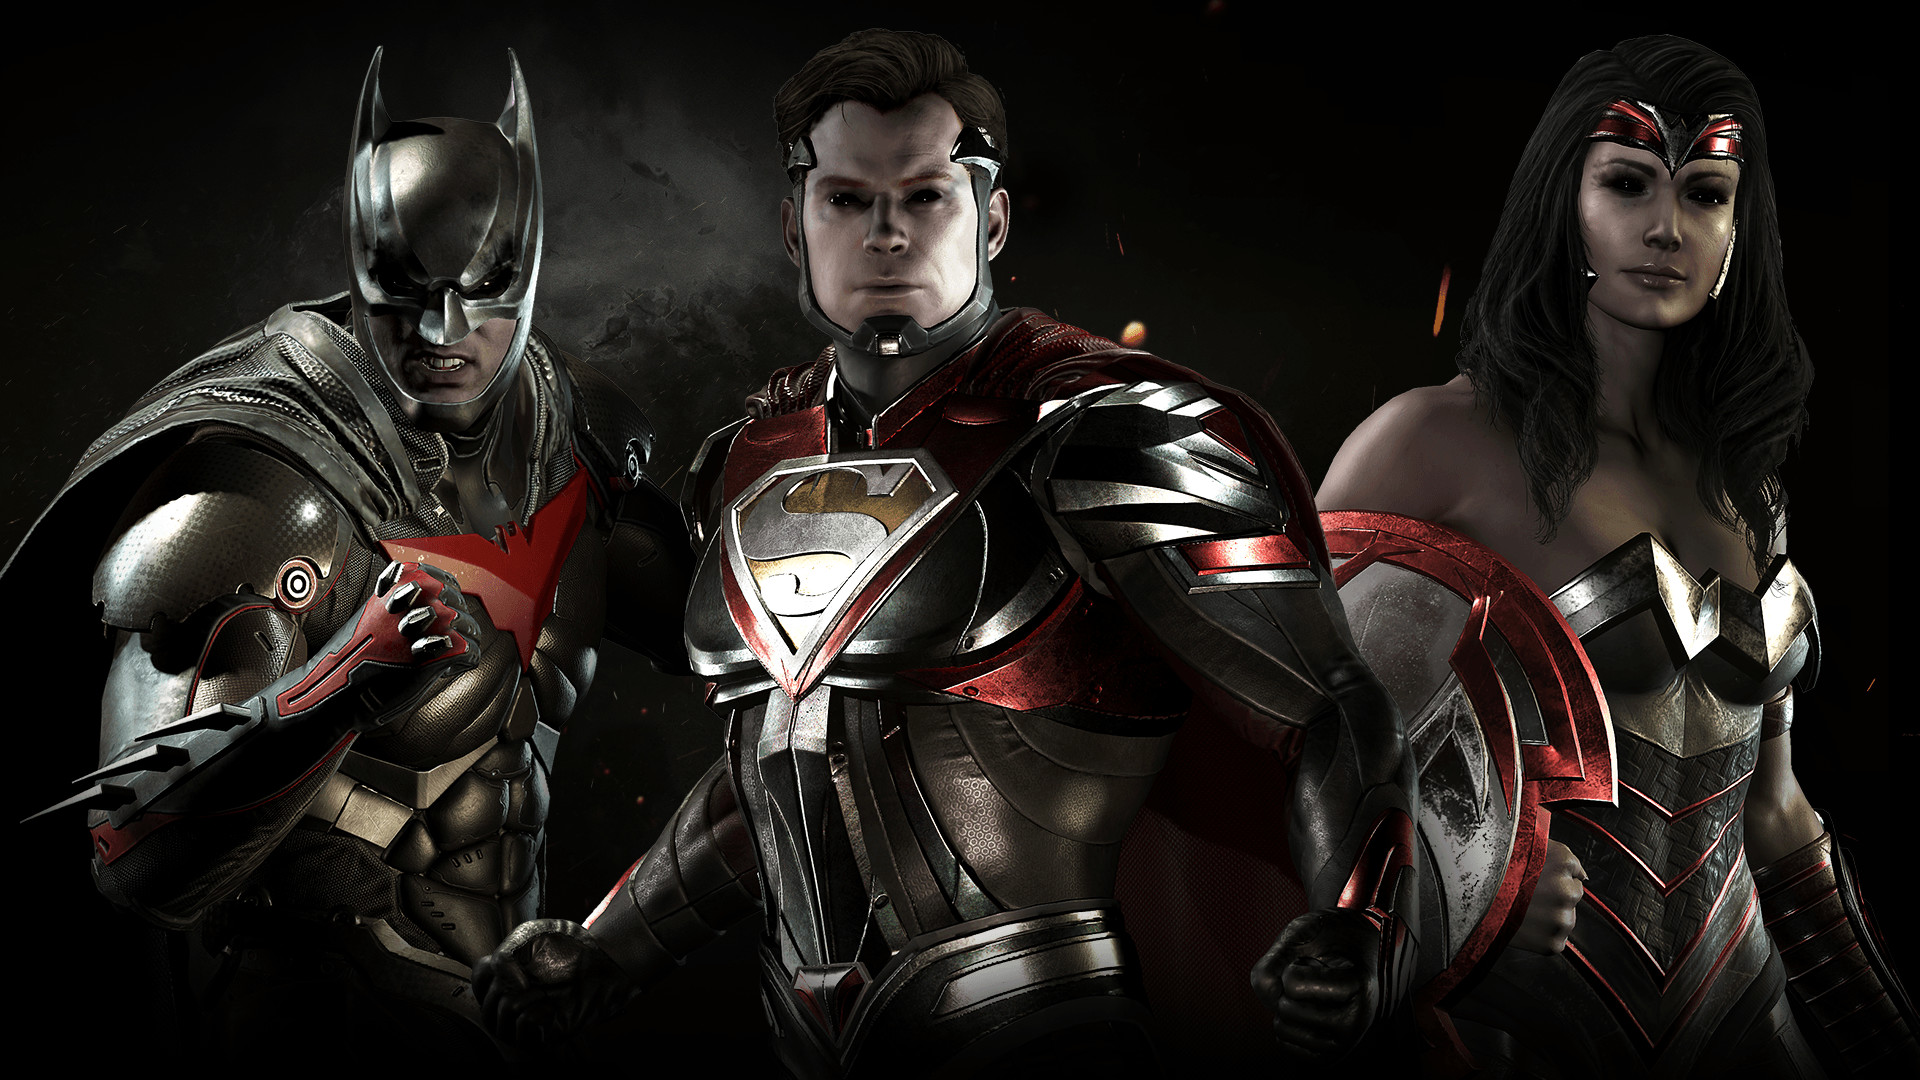 Injustice™ 2 - Demons Shader Pack Featured Screenshot #1